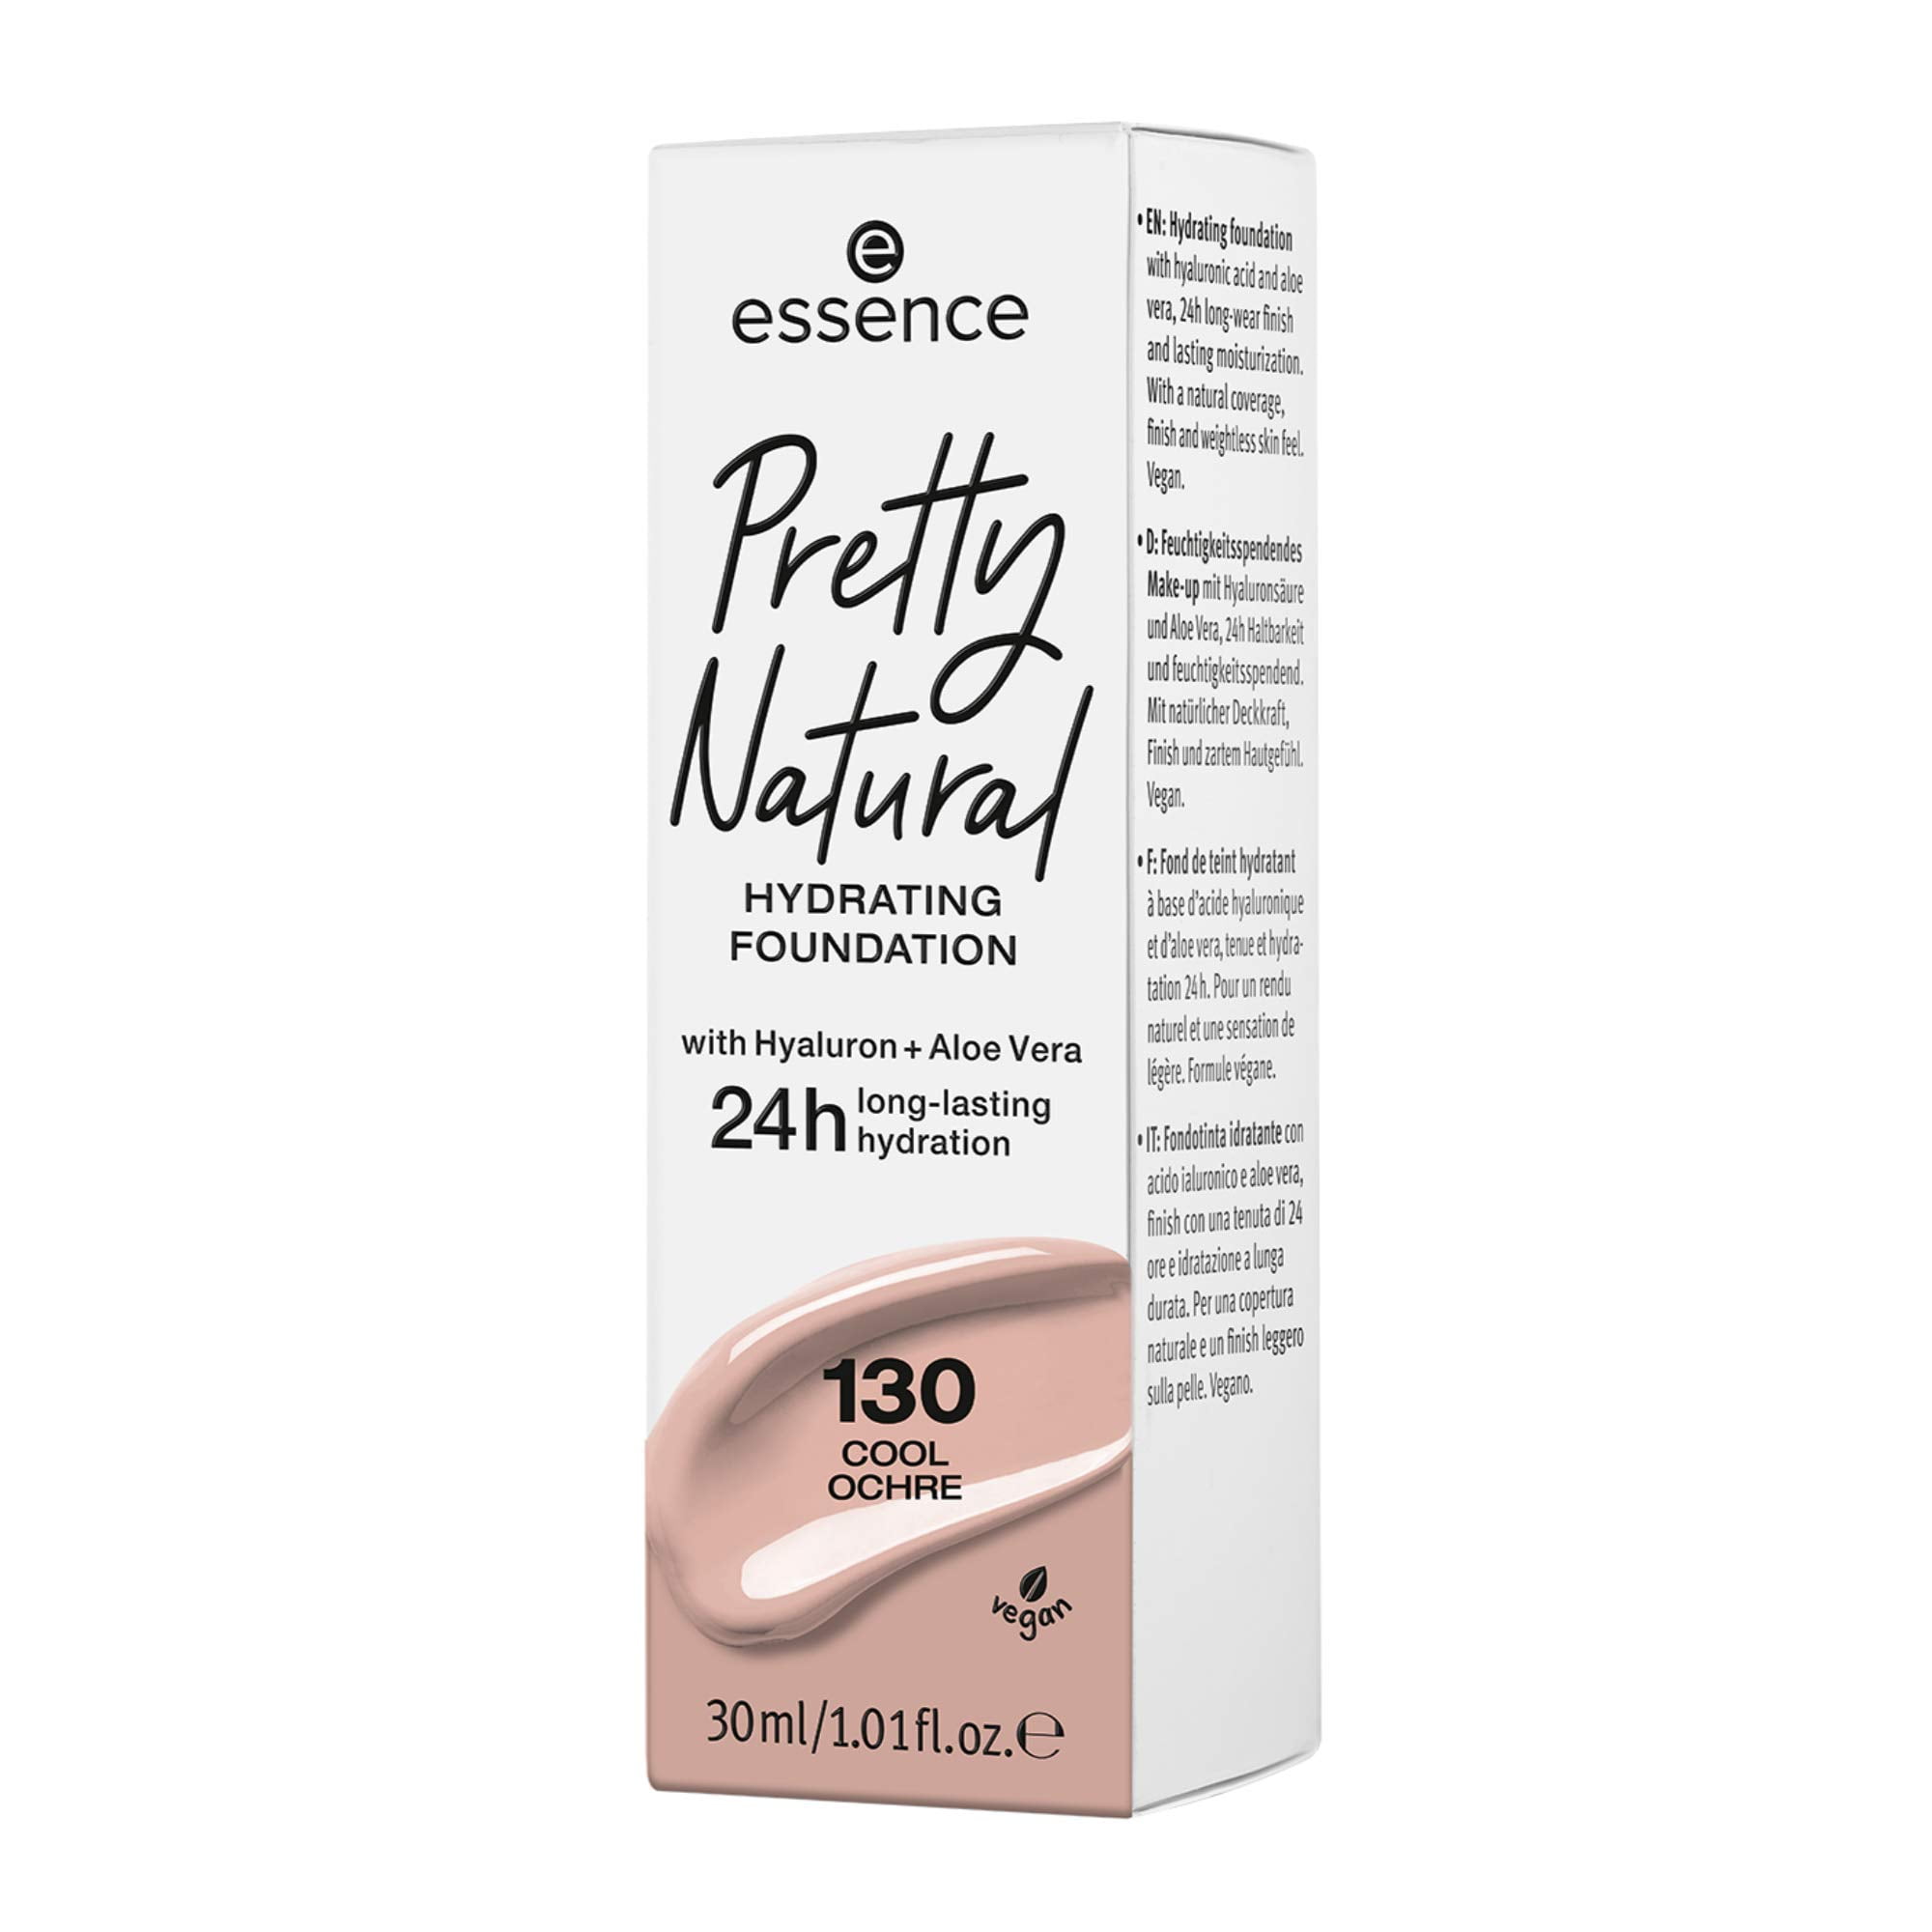 Pretty Coverage Hyaluronic a Oil Hydrating Natural Buildable Medium w/ - Vera Formulated for Skin Acid Alcohol Free Parabens, Cruelty Look Made Gluten, | essence Foundation w/o & Aloe Vegan Natural & &